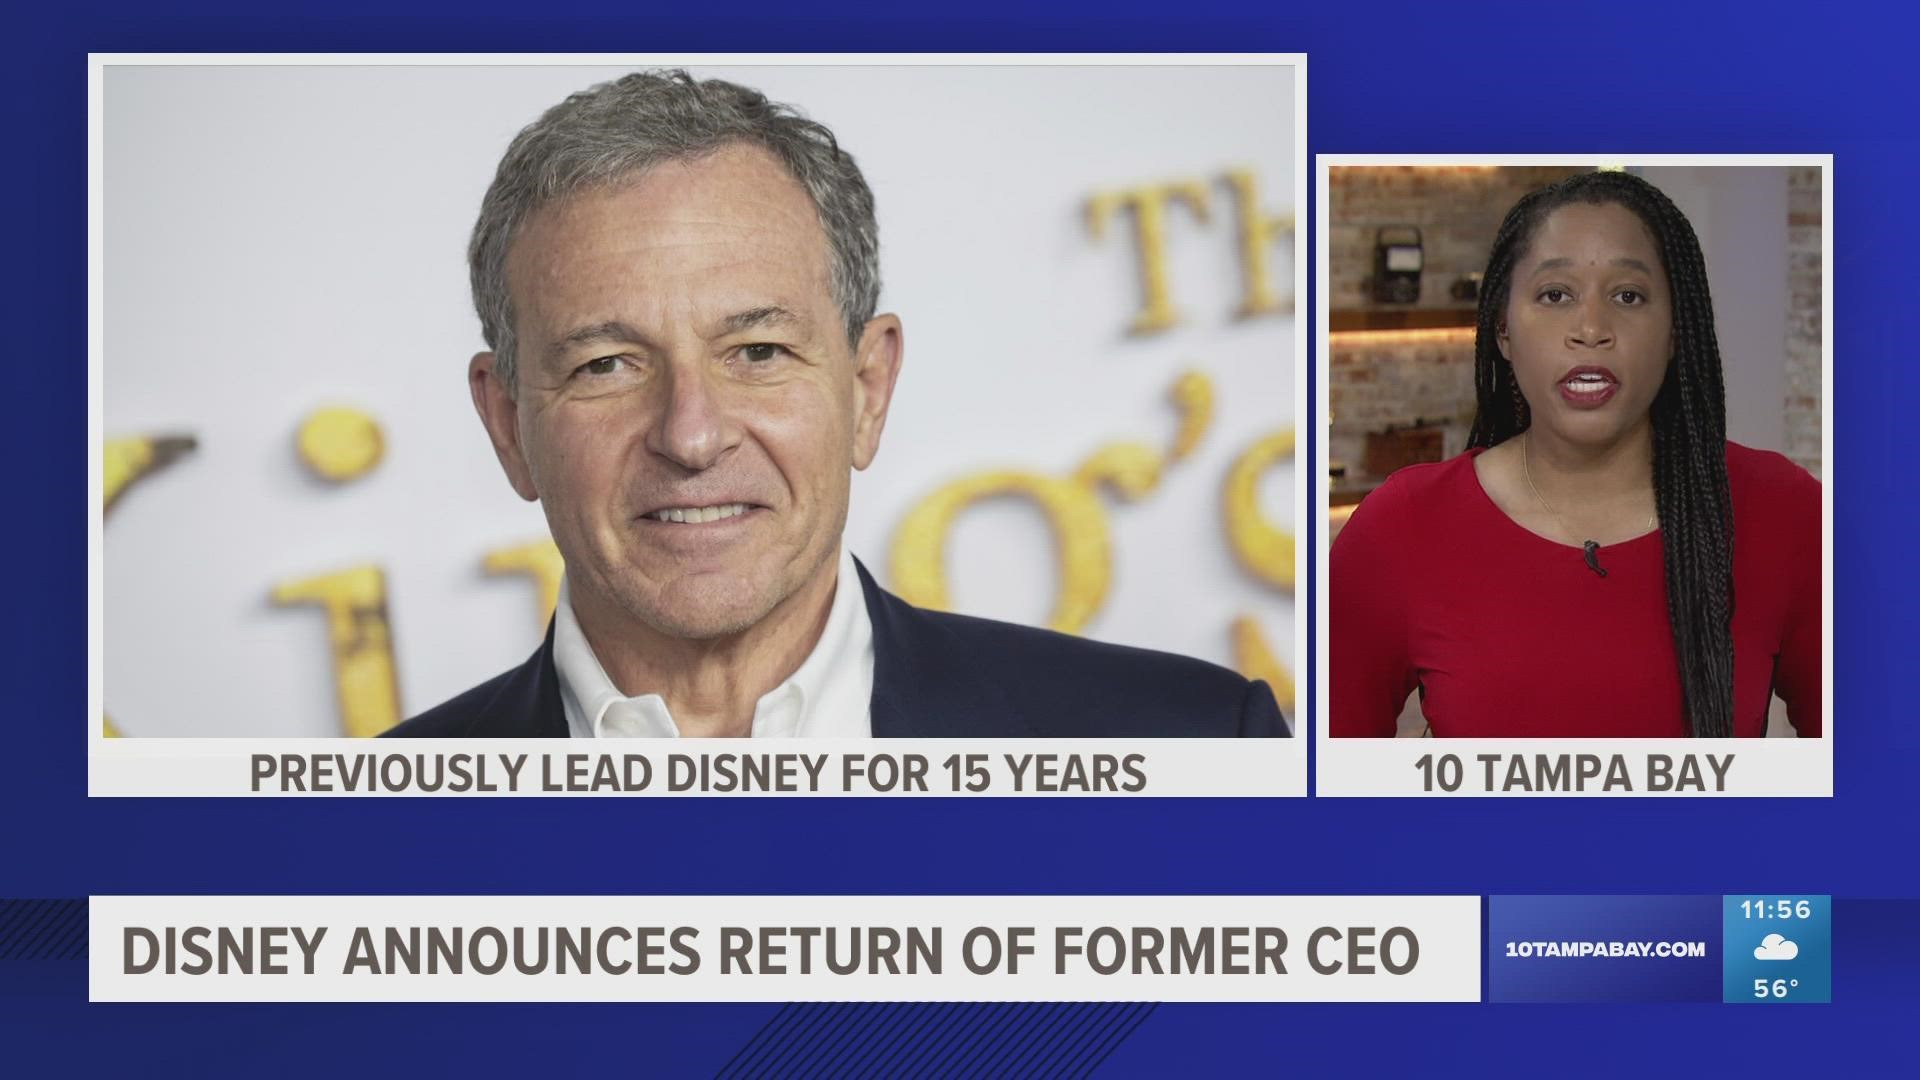 Iger led Disney for 15 years before stepping down in 2020.